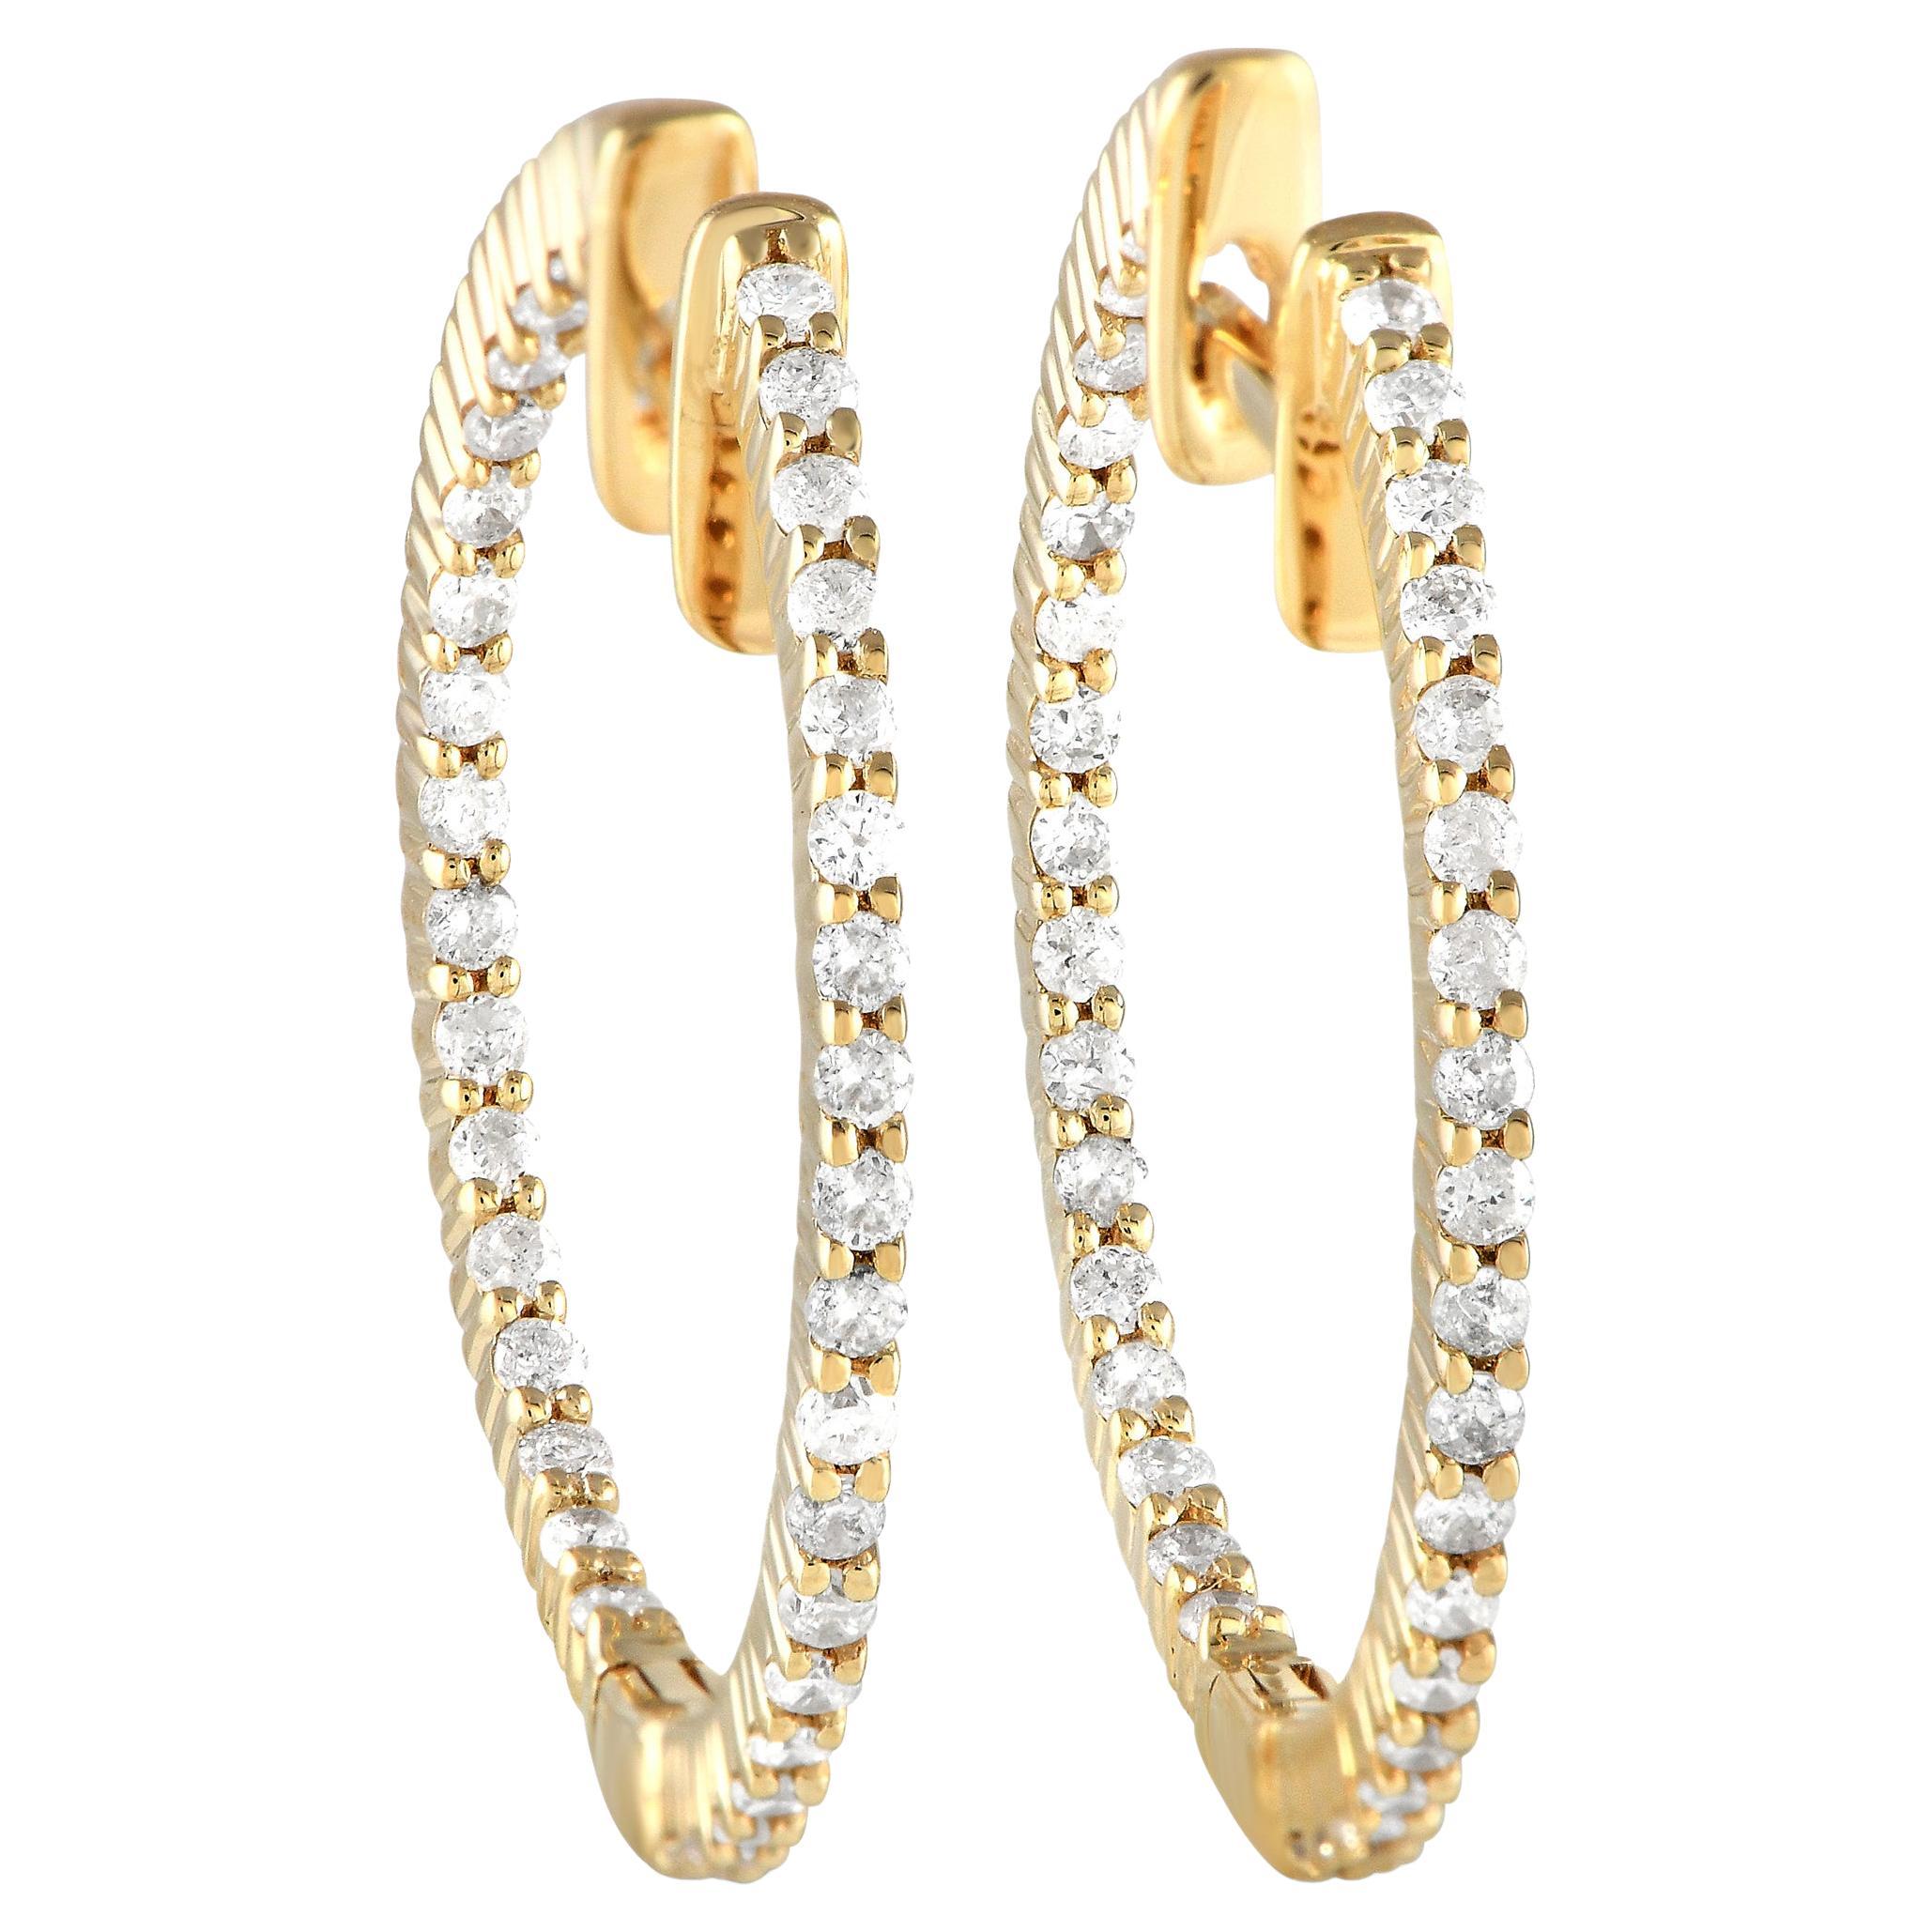 Lb Exclusive 14k Yellow Gold 0.55 Carat Diamond Inside-Out Hoop Earrings For Sale